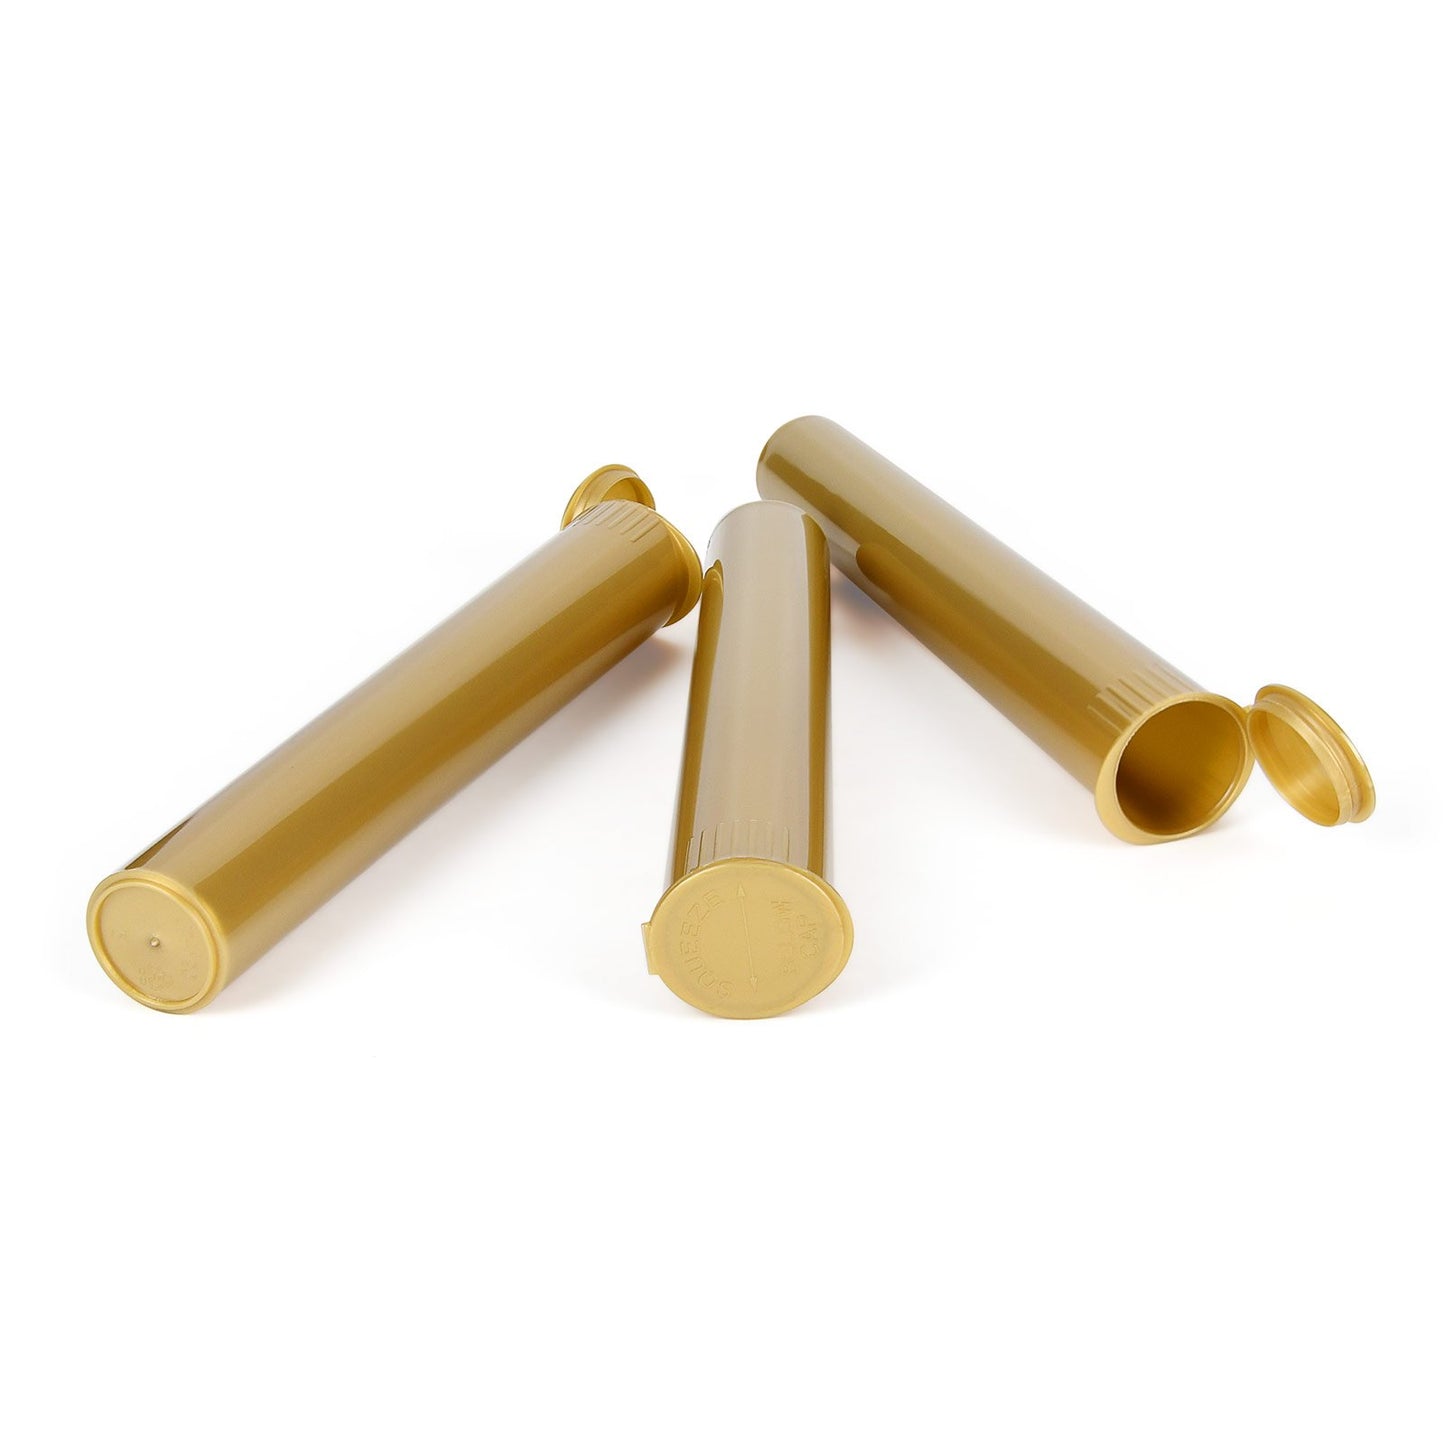 120mm RX Squeeze Tubes Opaque Gold 500 COUNT